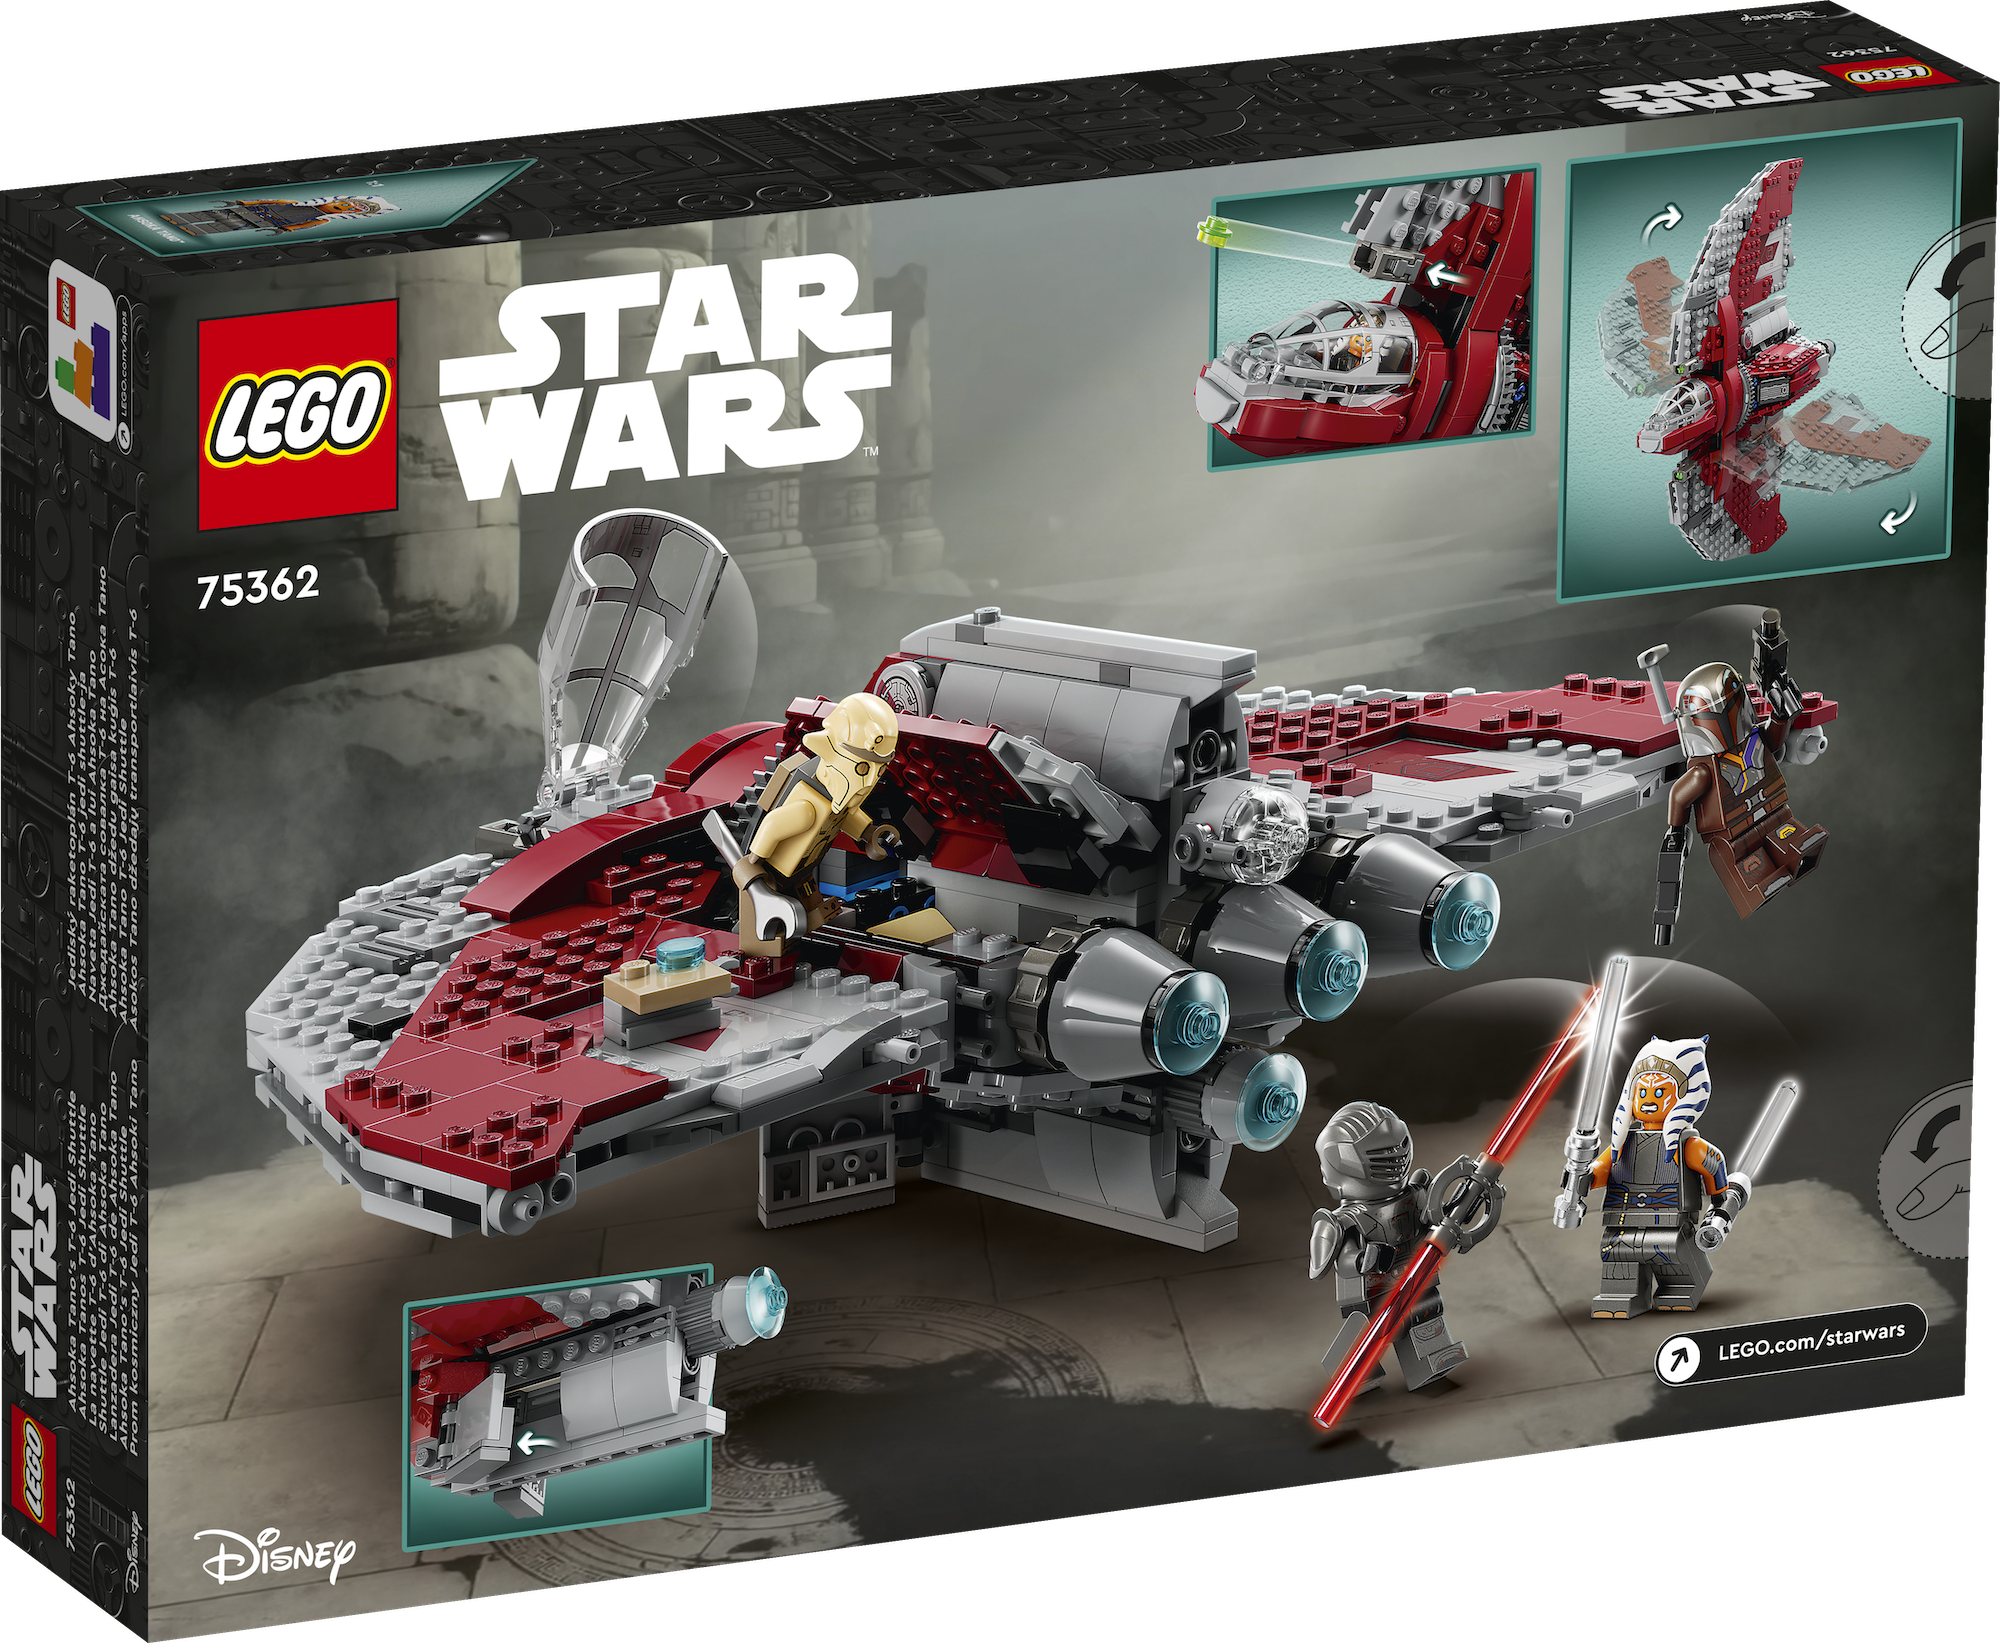 New image of The Last Jedi sets revealed!